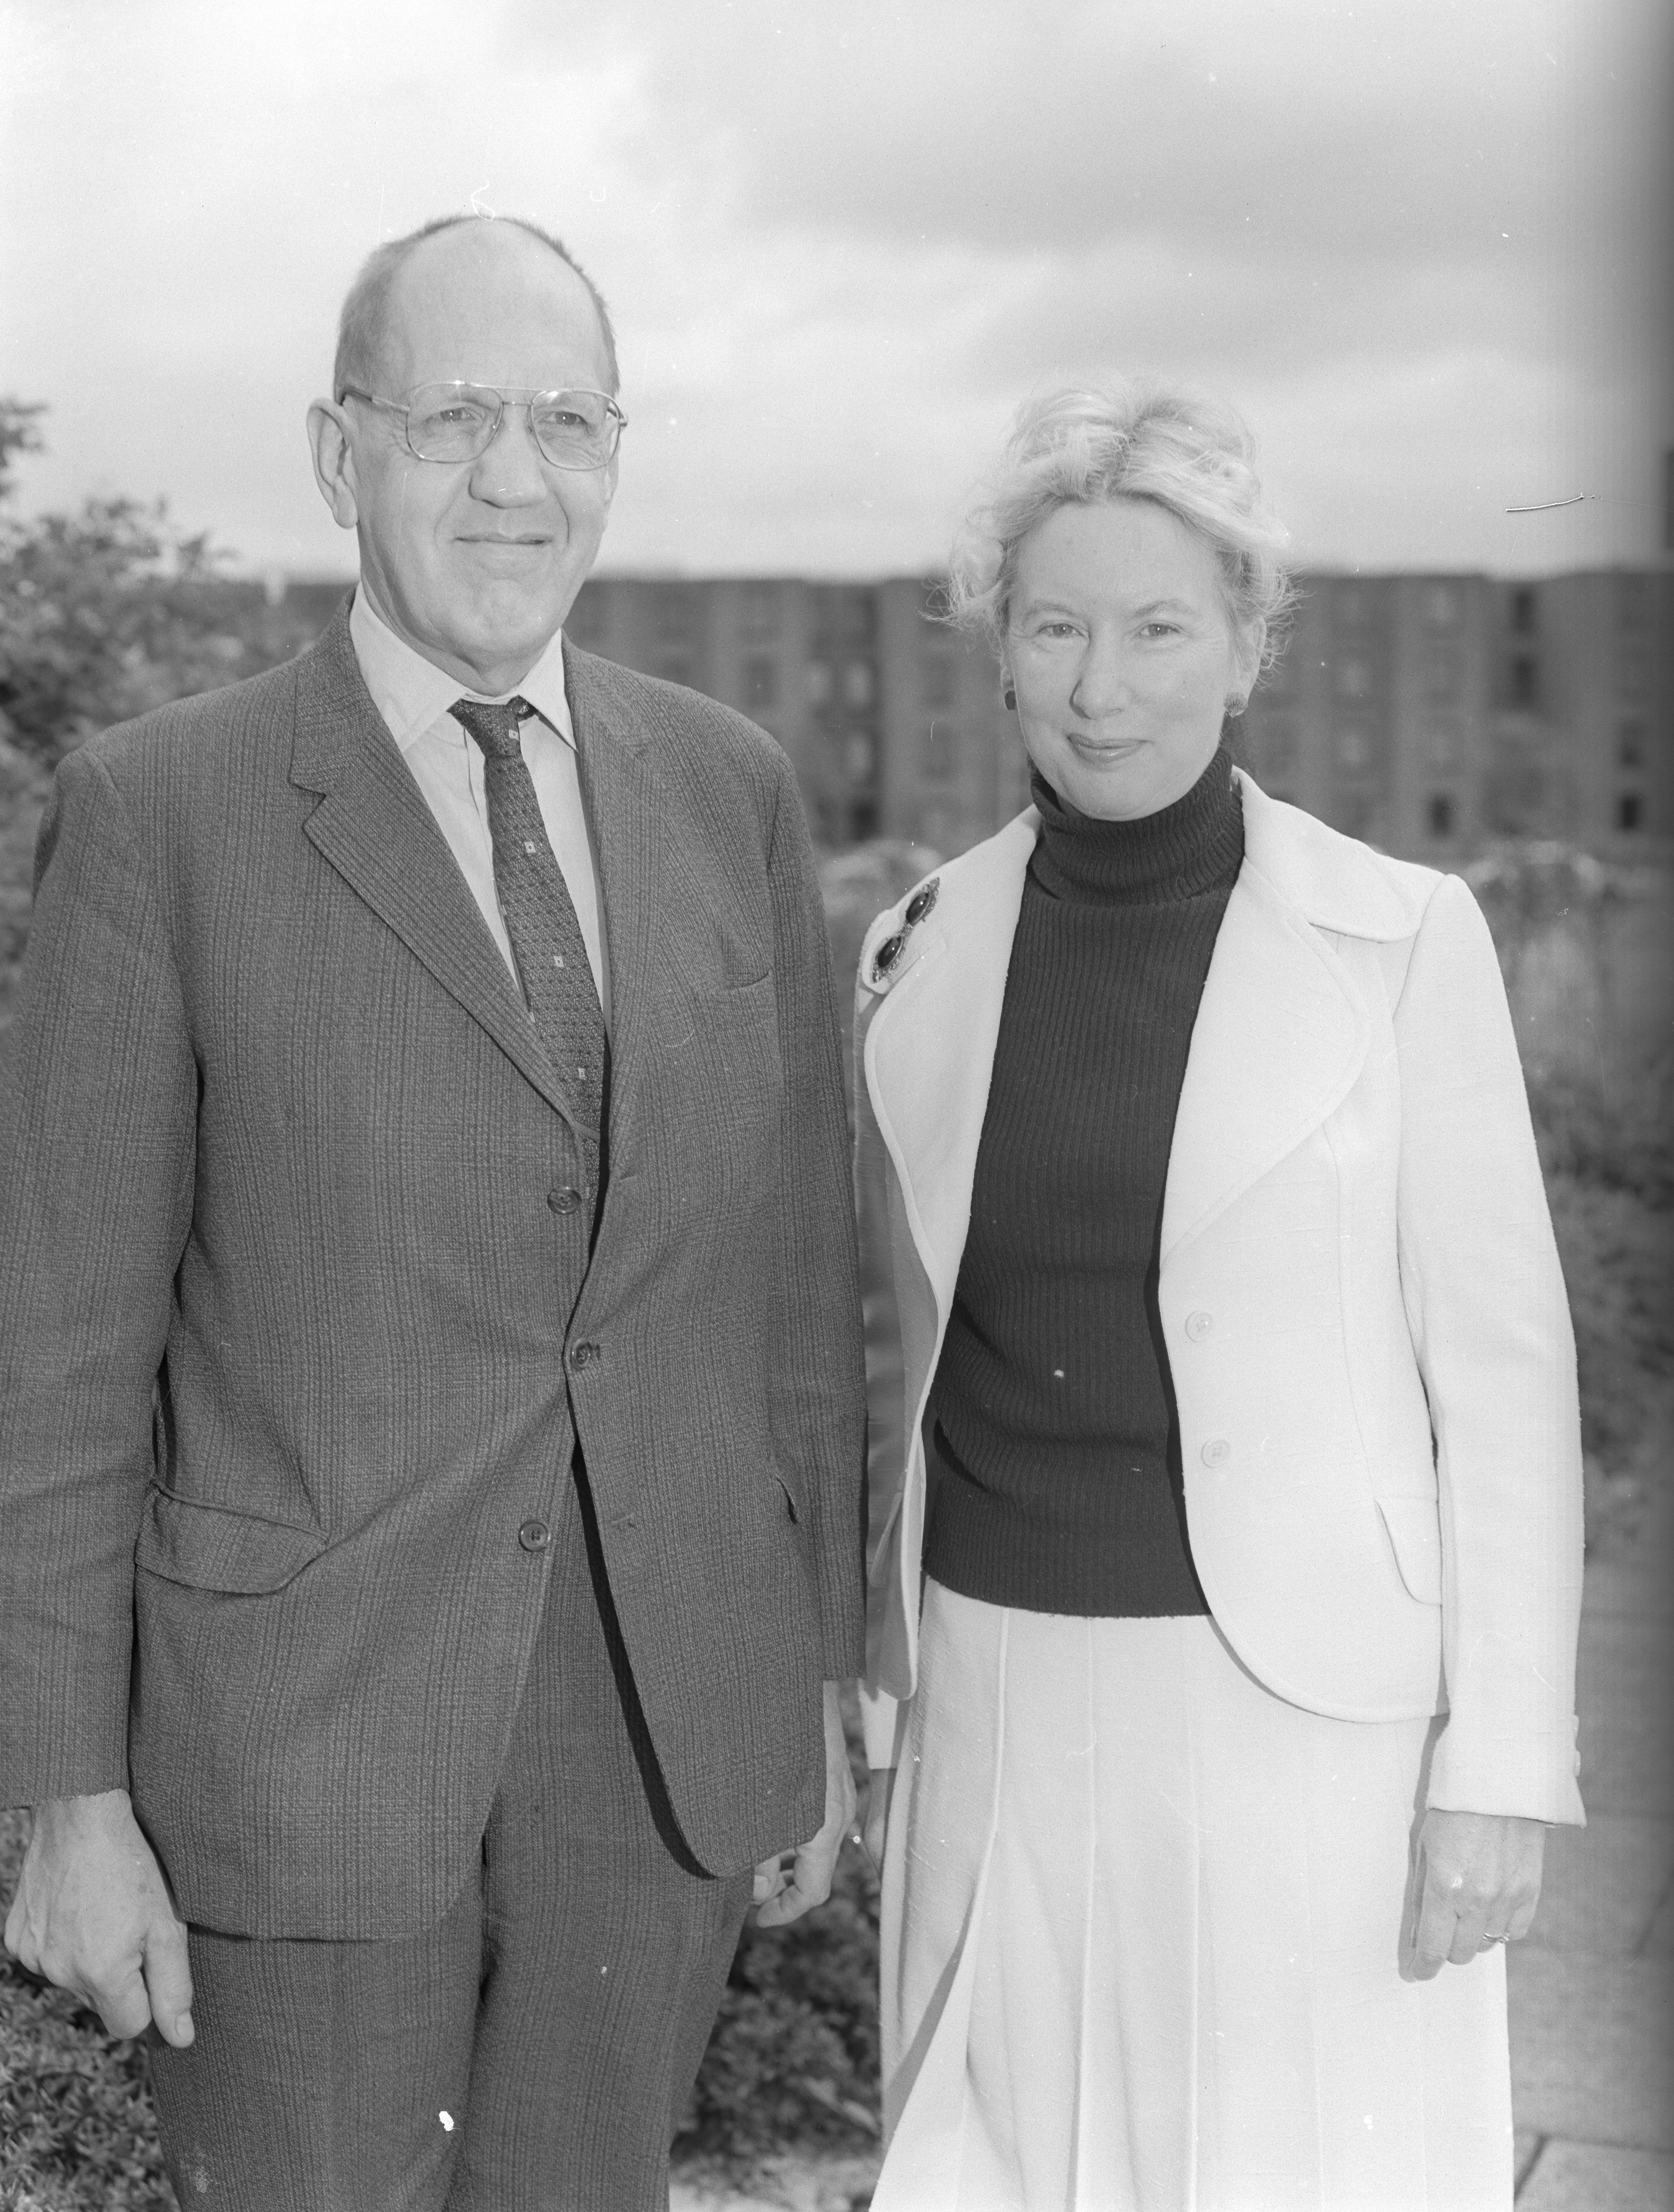 Black and white photograph of Eric Fox, first Registrar of the University of Kent, and his wife Mary on the University of Kent campus.